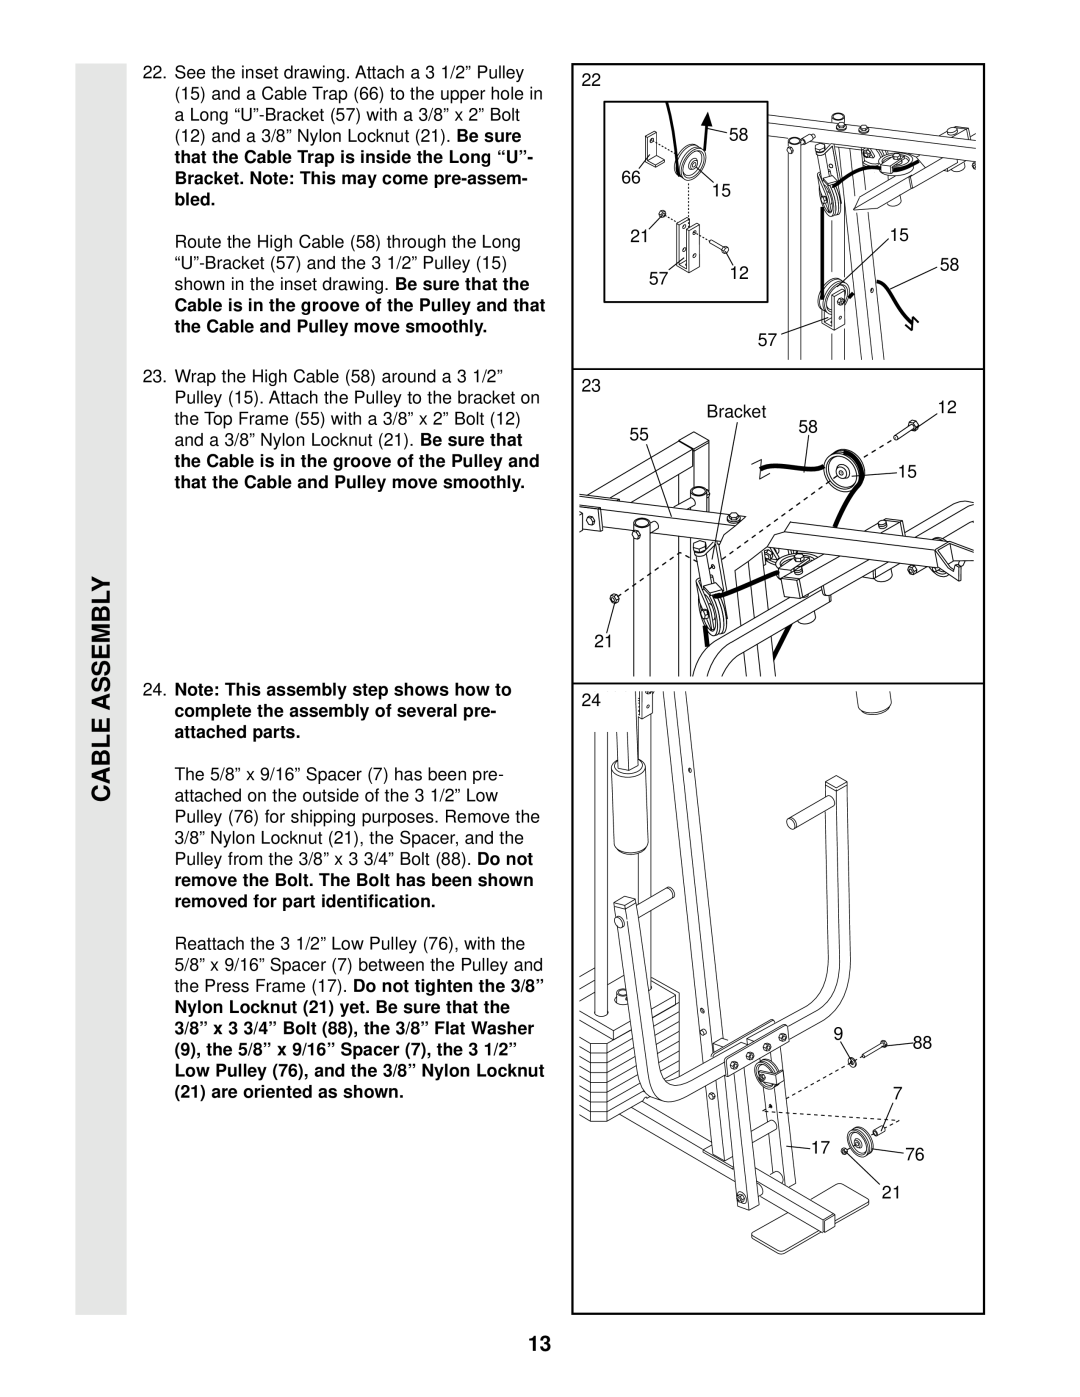 Weider WESY96400 user manual that the Cable Trap is inside the Long “U” 